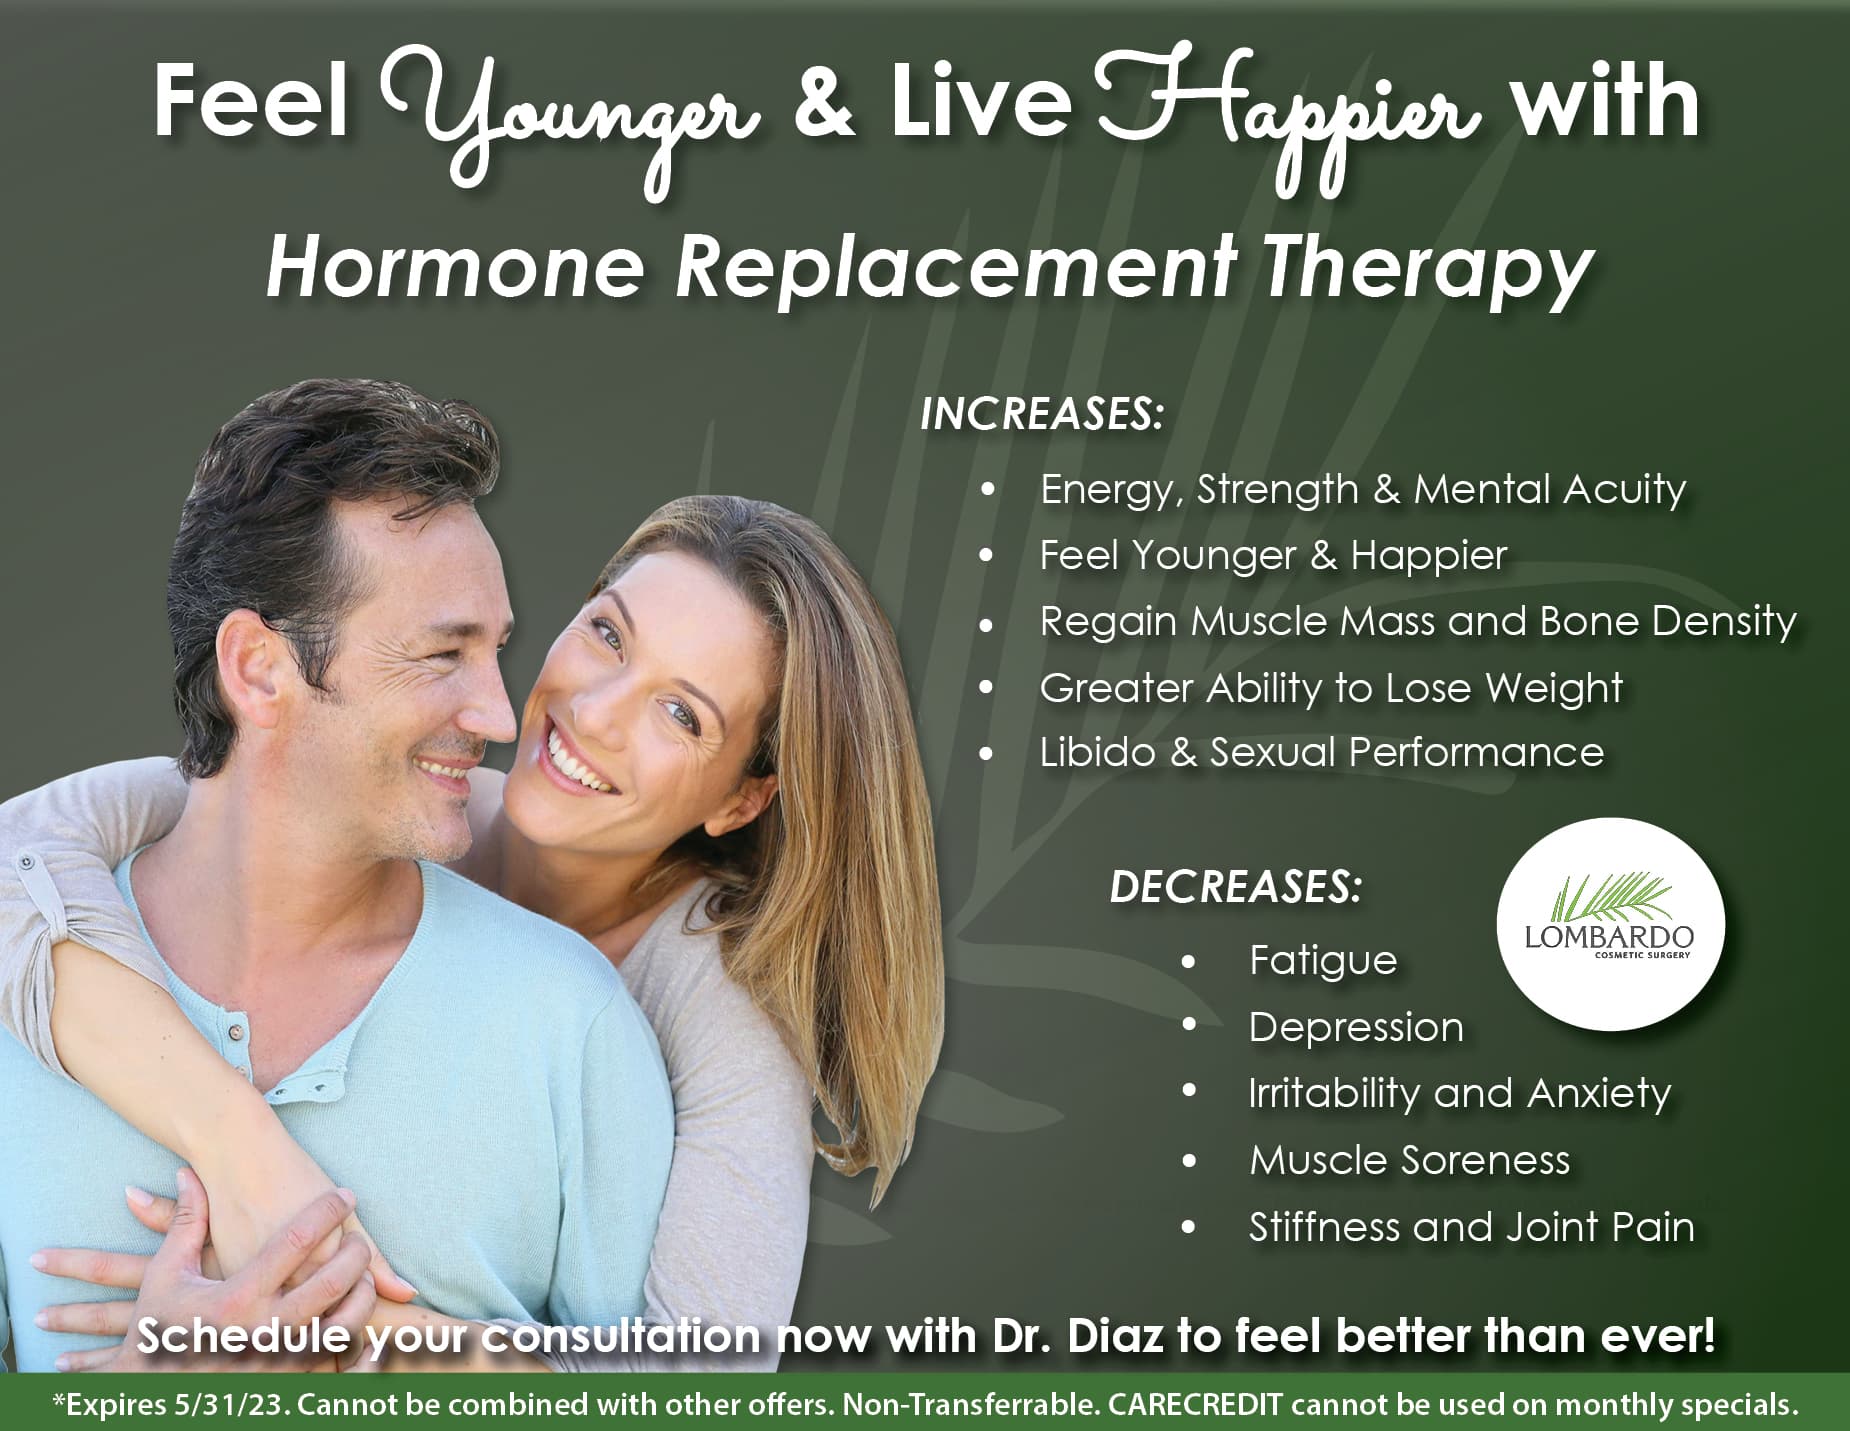 Feel Younger & Happier with Hormone Replacement Therapy